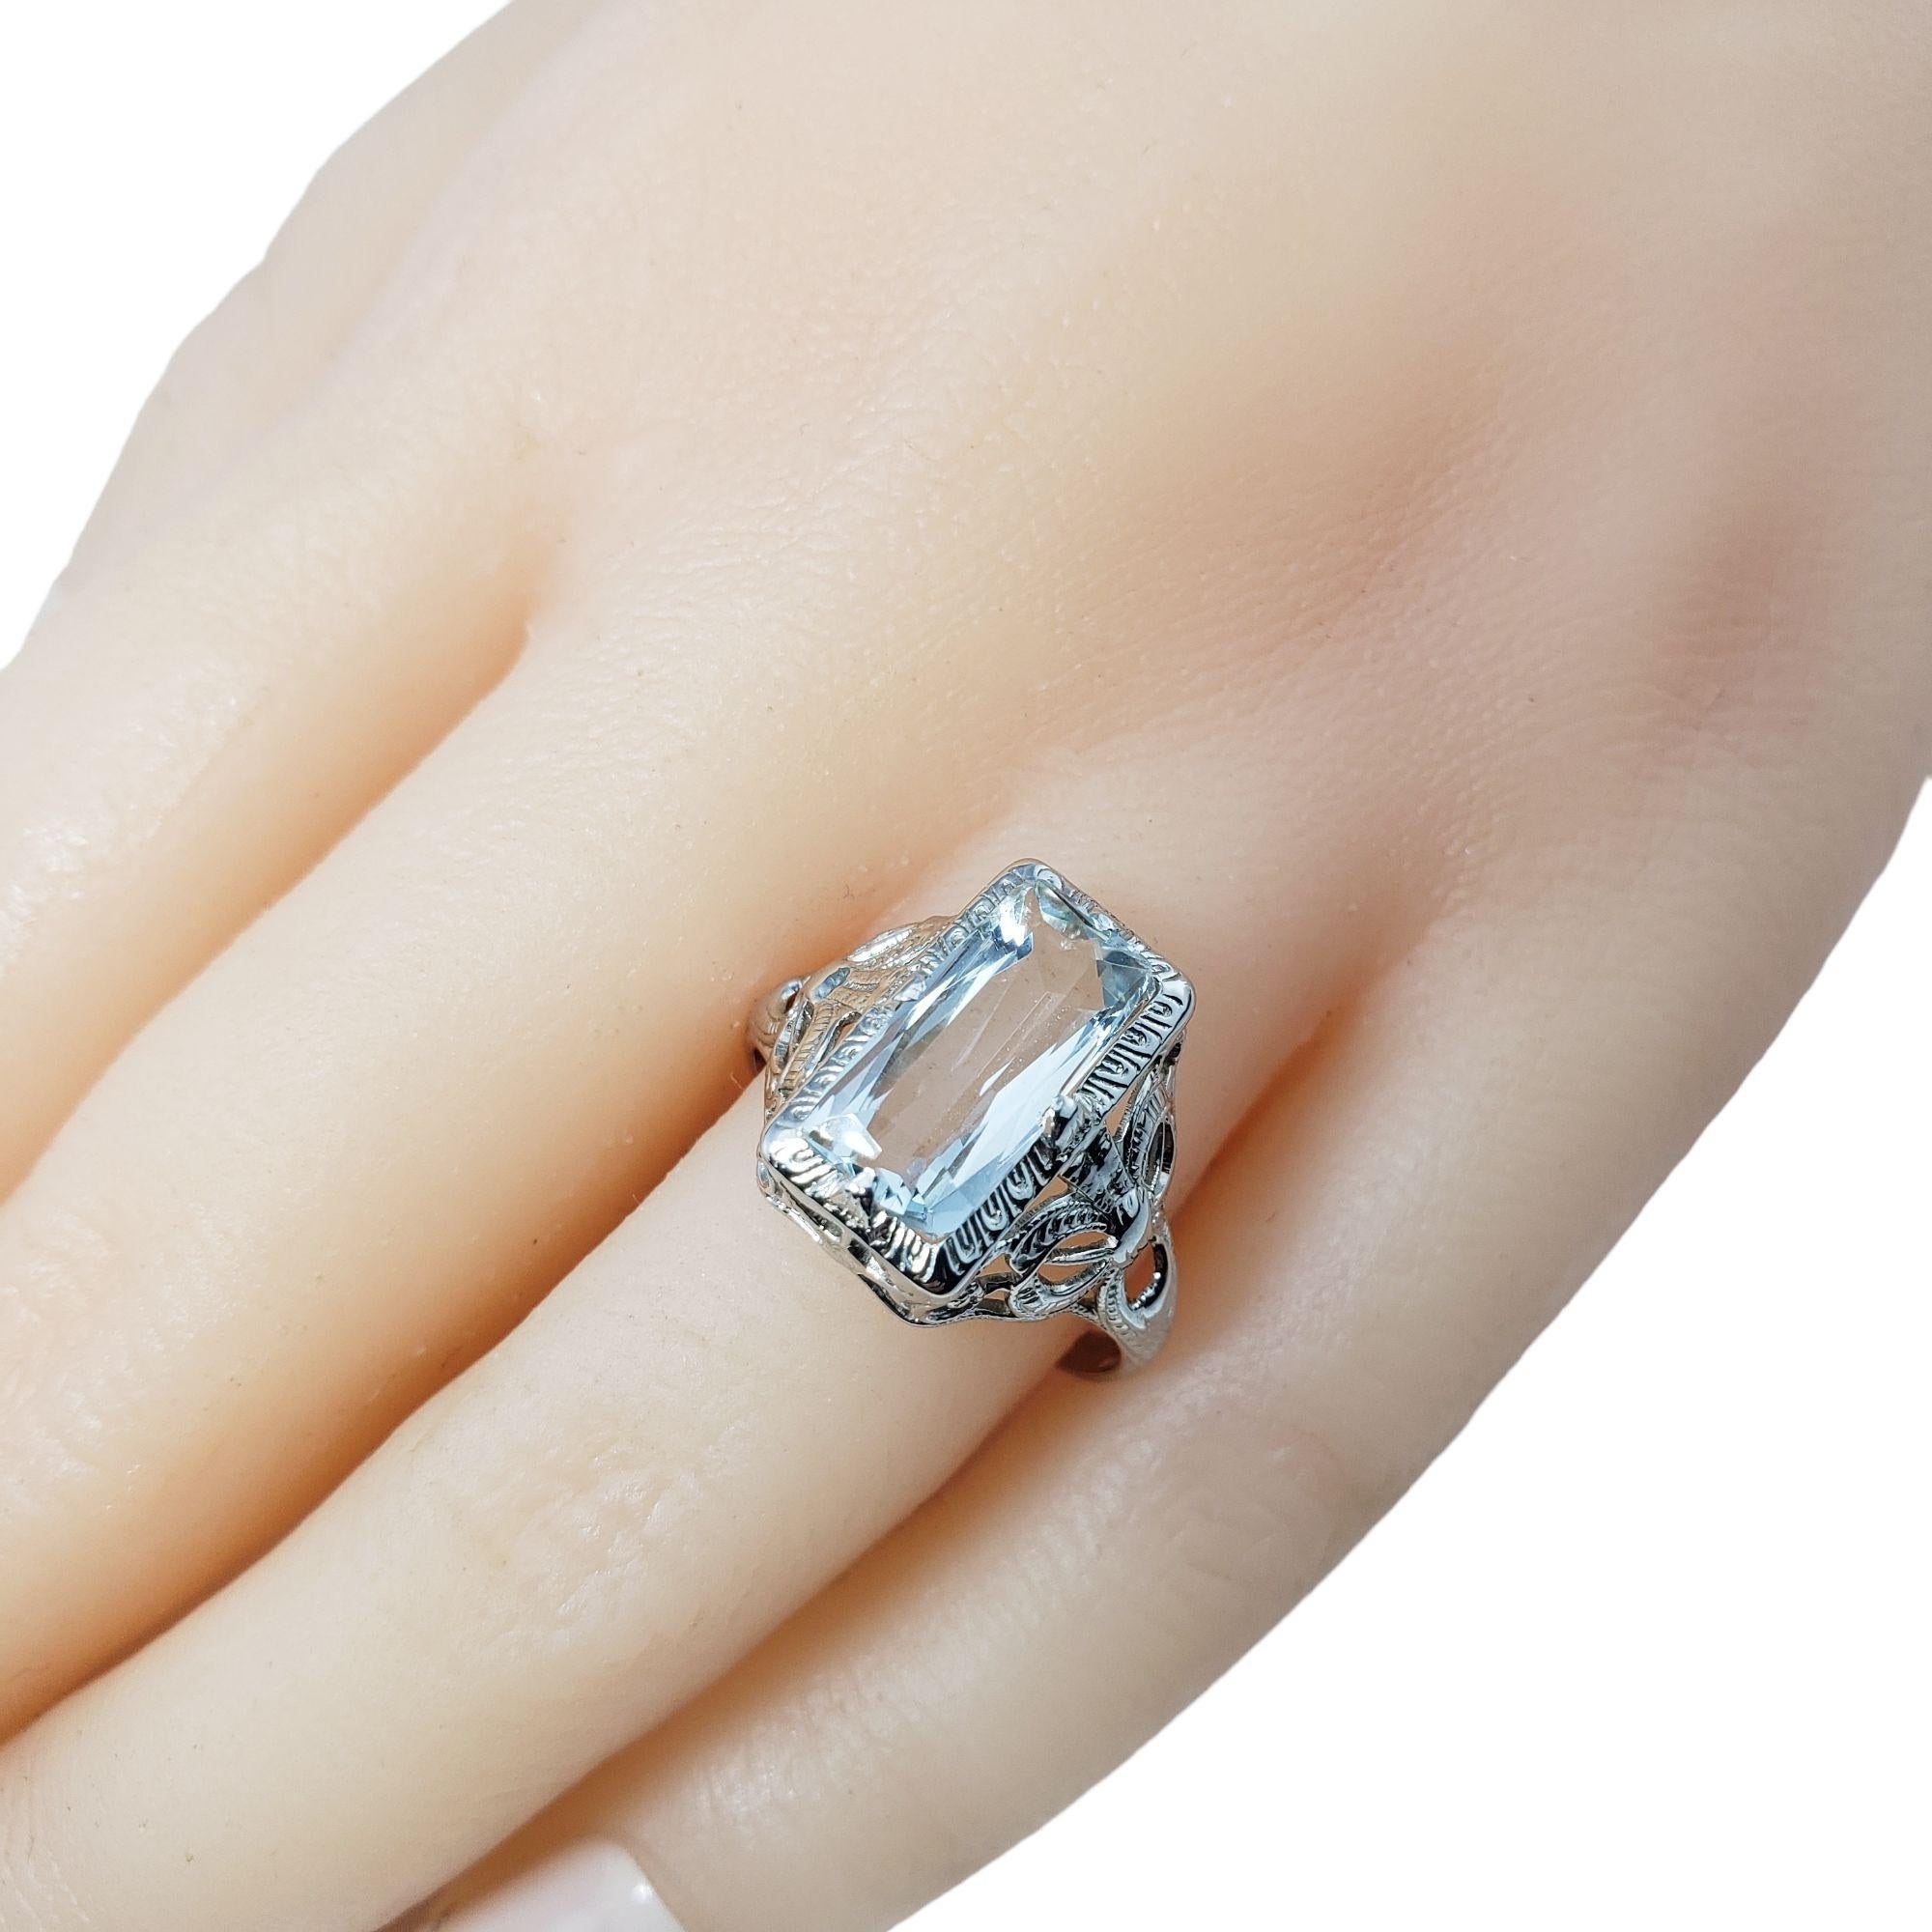 Vintage 14 Karat White Gold Aquamarine Ring Size 6.75 GAI Certified-

This lovely ring features one emerald cut aquamarine (11 mm x 7 mm) set in beautifully detailed white gold filigree.
Shank: 2 mm.

Aquamarine weight: 3.53 ct.

Ring Size: